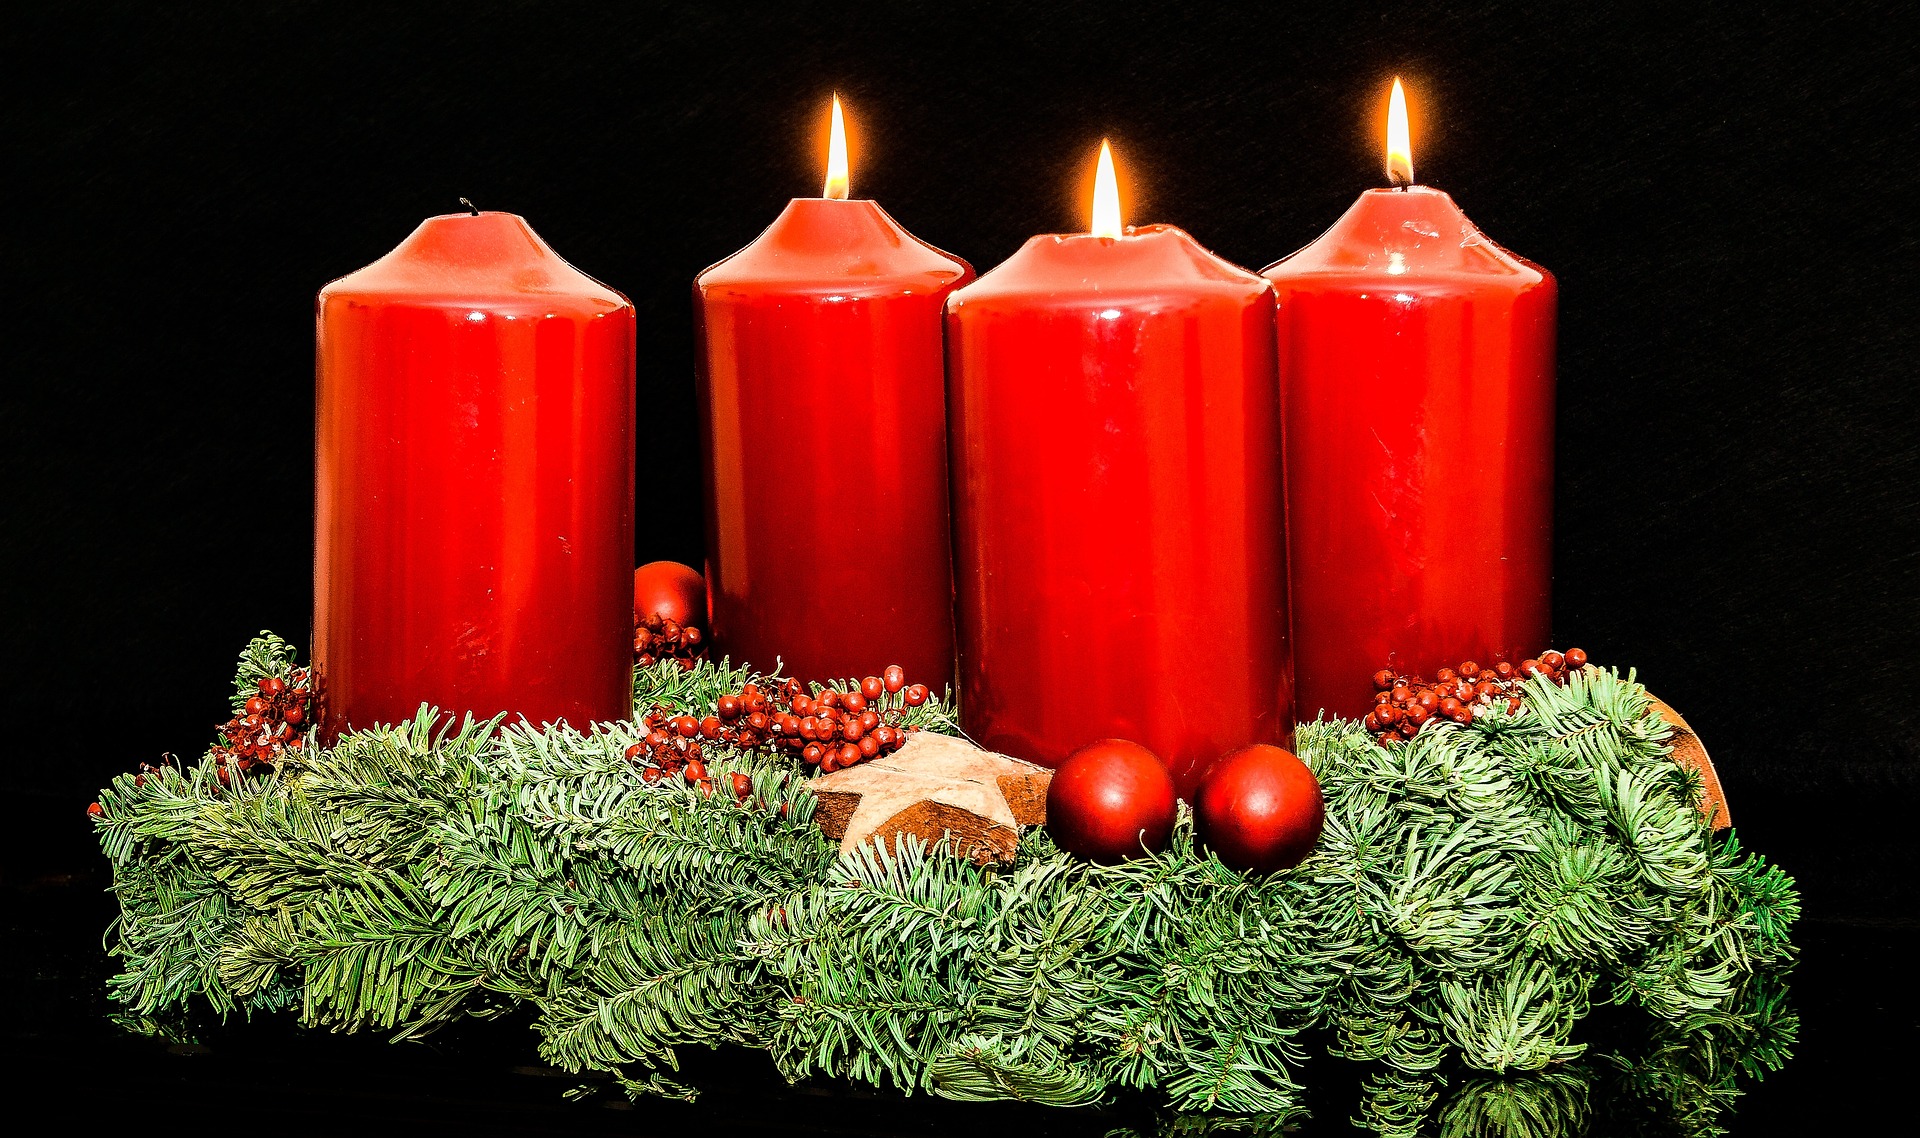 Advent wreath with four red candles. Only three of the candles are burning.